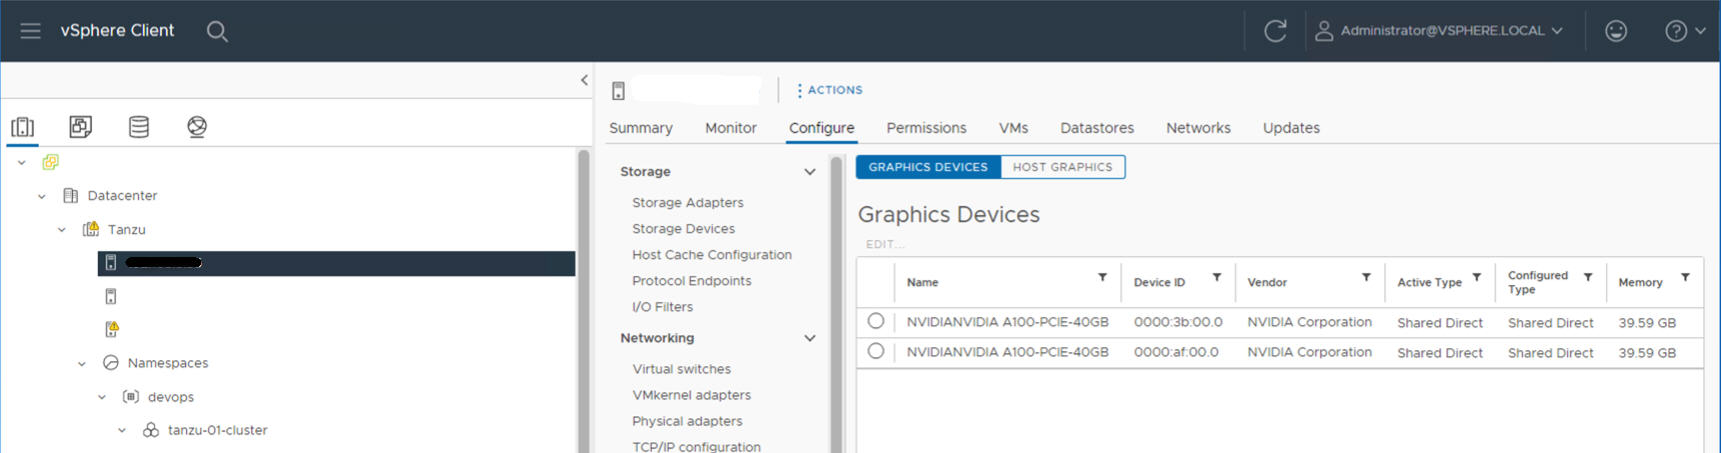 The Graphics Devices tab in the vSphere Client lists the NVIDIA GPU A100 devices.